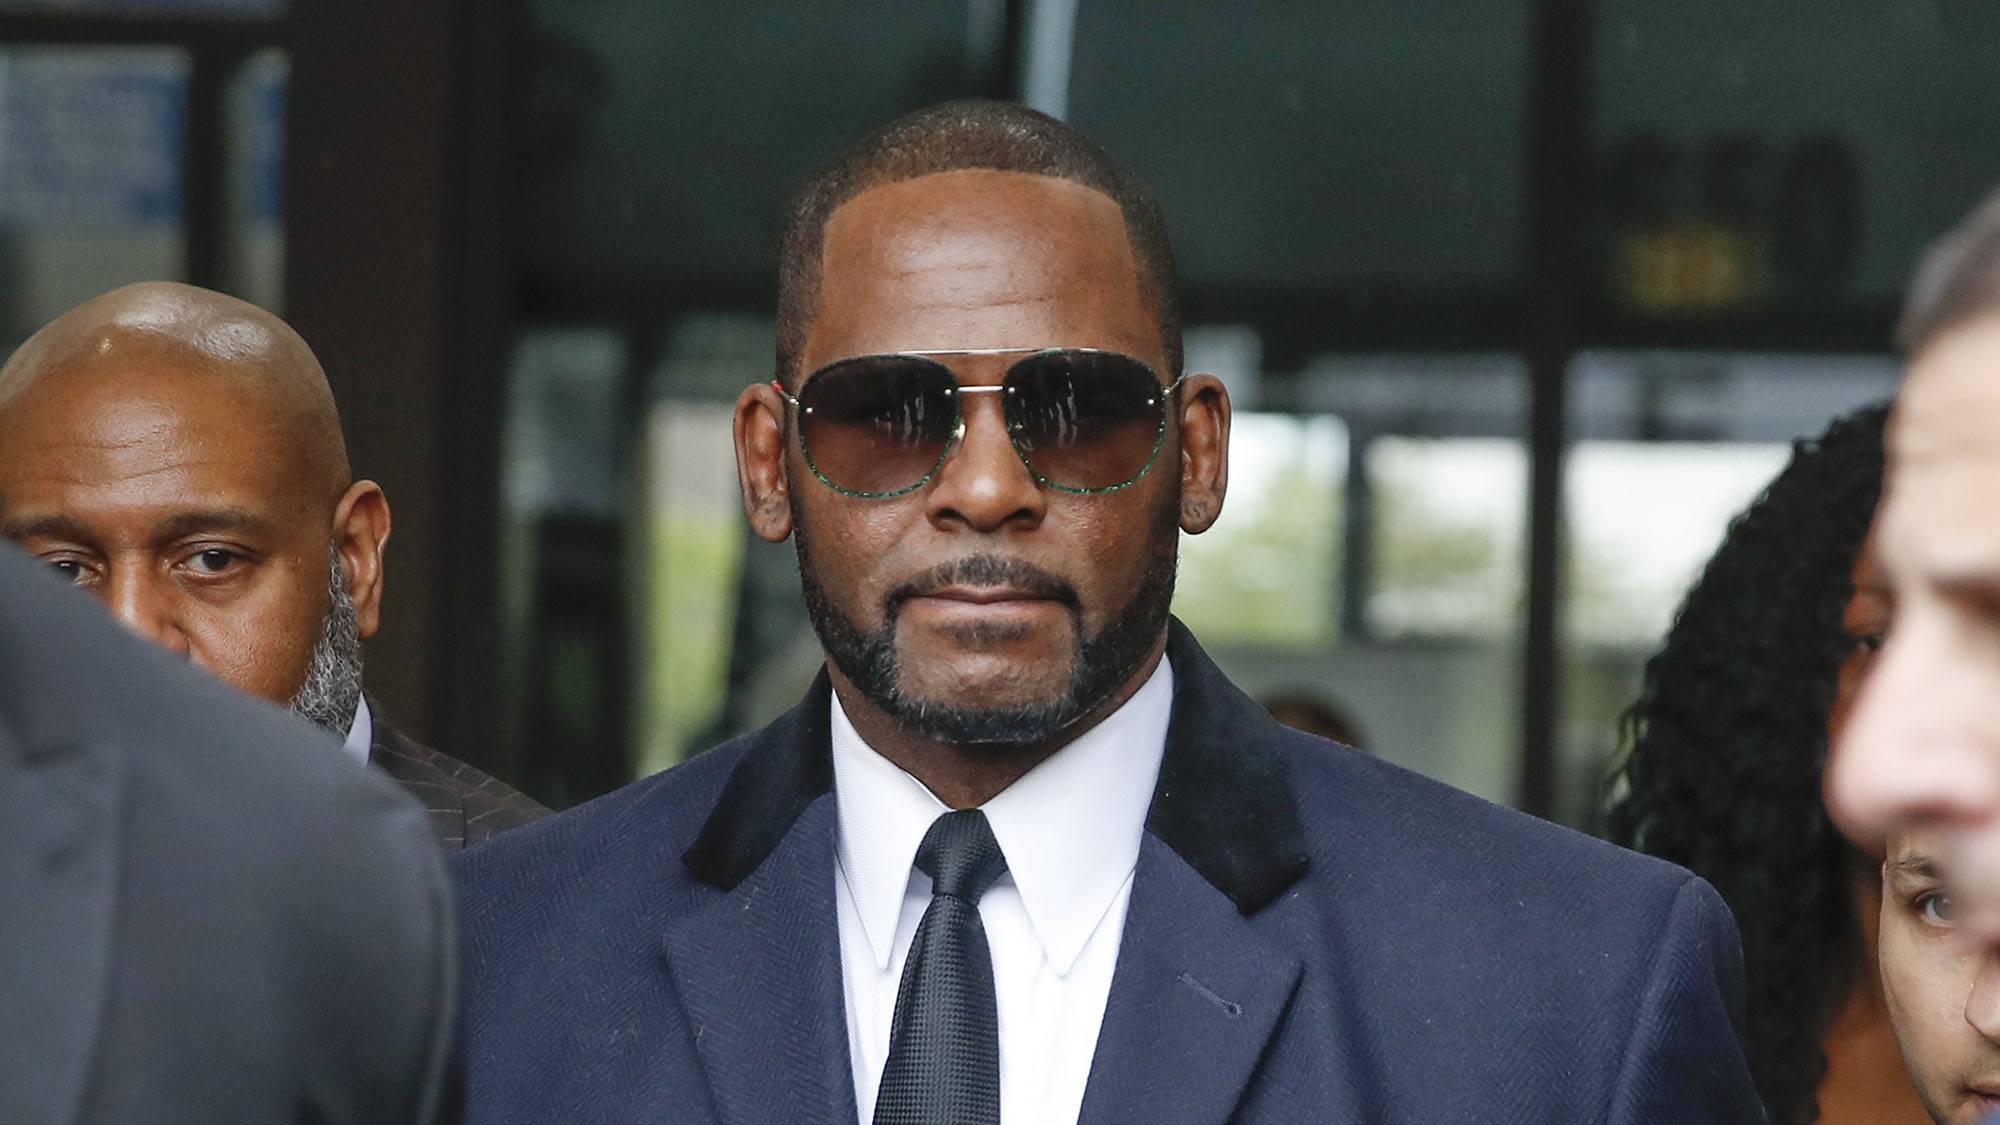 Girl In Sex Videos Allegedly Recorded By R. Kelly Expected To Testify |  News | BET